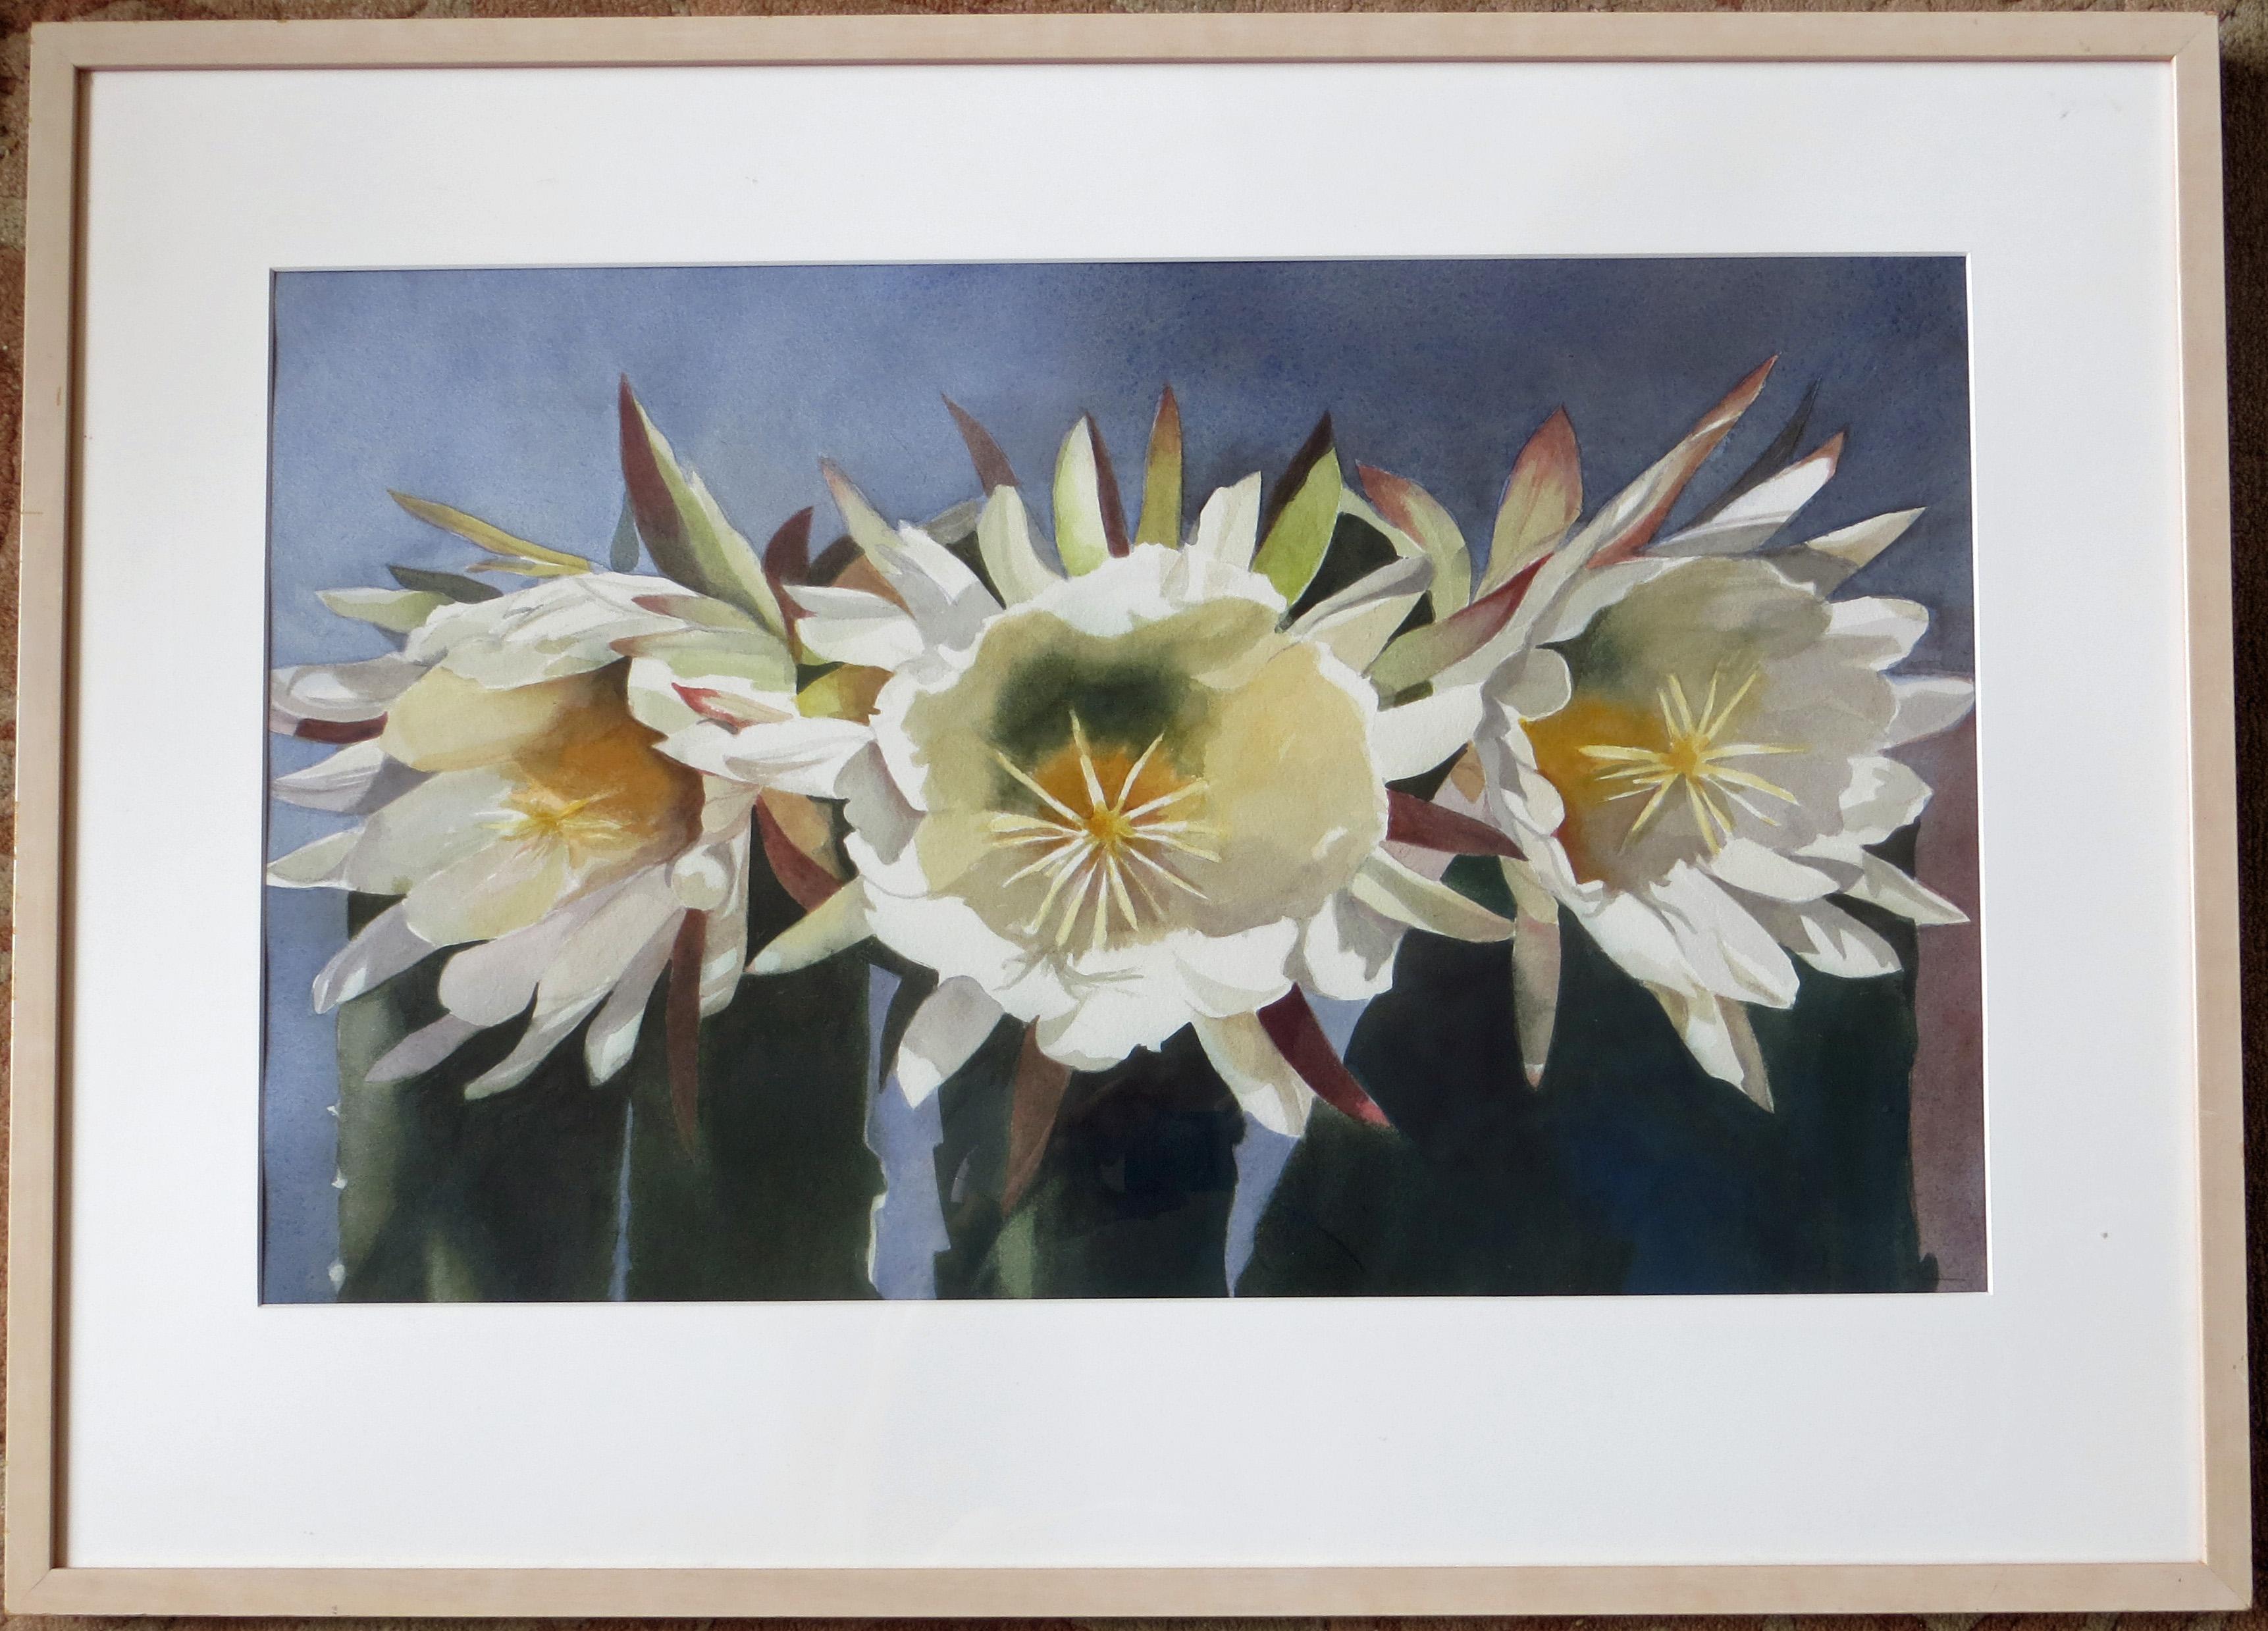 Artist: Judith Klausenstock– American (1928- )
Title: Untitled
Year: circa 1995
Medium: Watercolor
Sight size: 17 x 27.75 inches. 
Framed size: 26.25 x 36.25 inches 
Signature: Signed lower right
Condition: Very good 
Frame: Framed in original